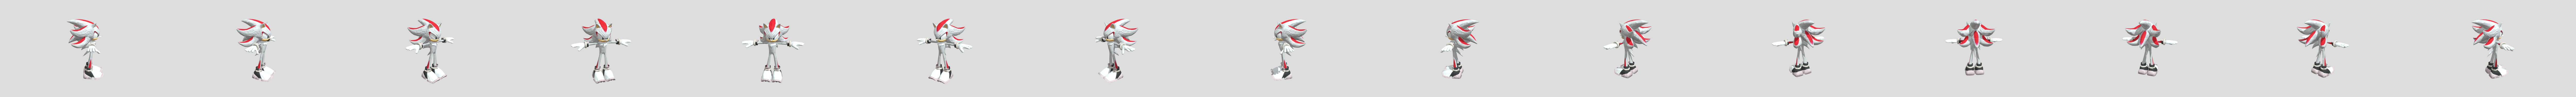 Xbox 360 - Sonic the Hedgehog (2006) - Shadow - The Models Resource